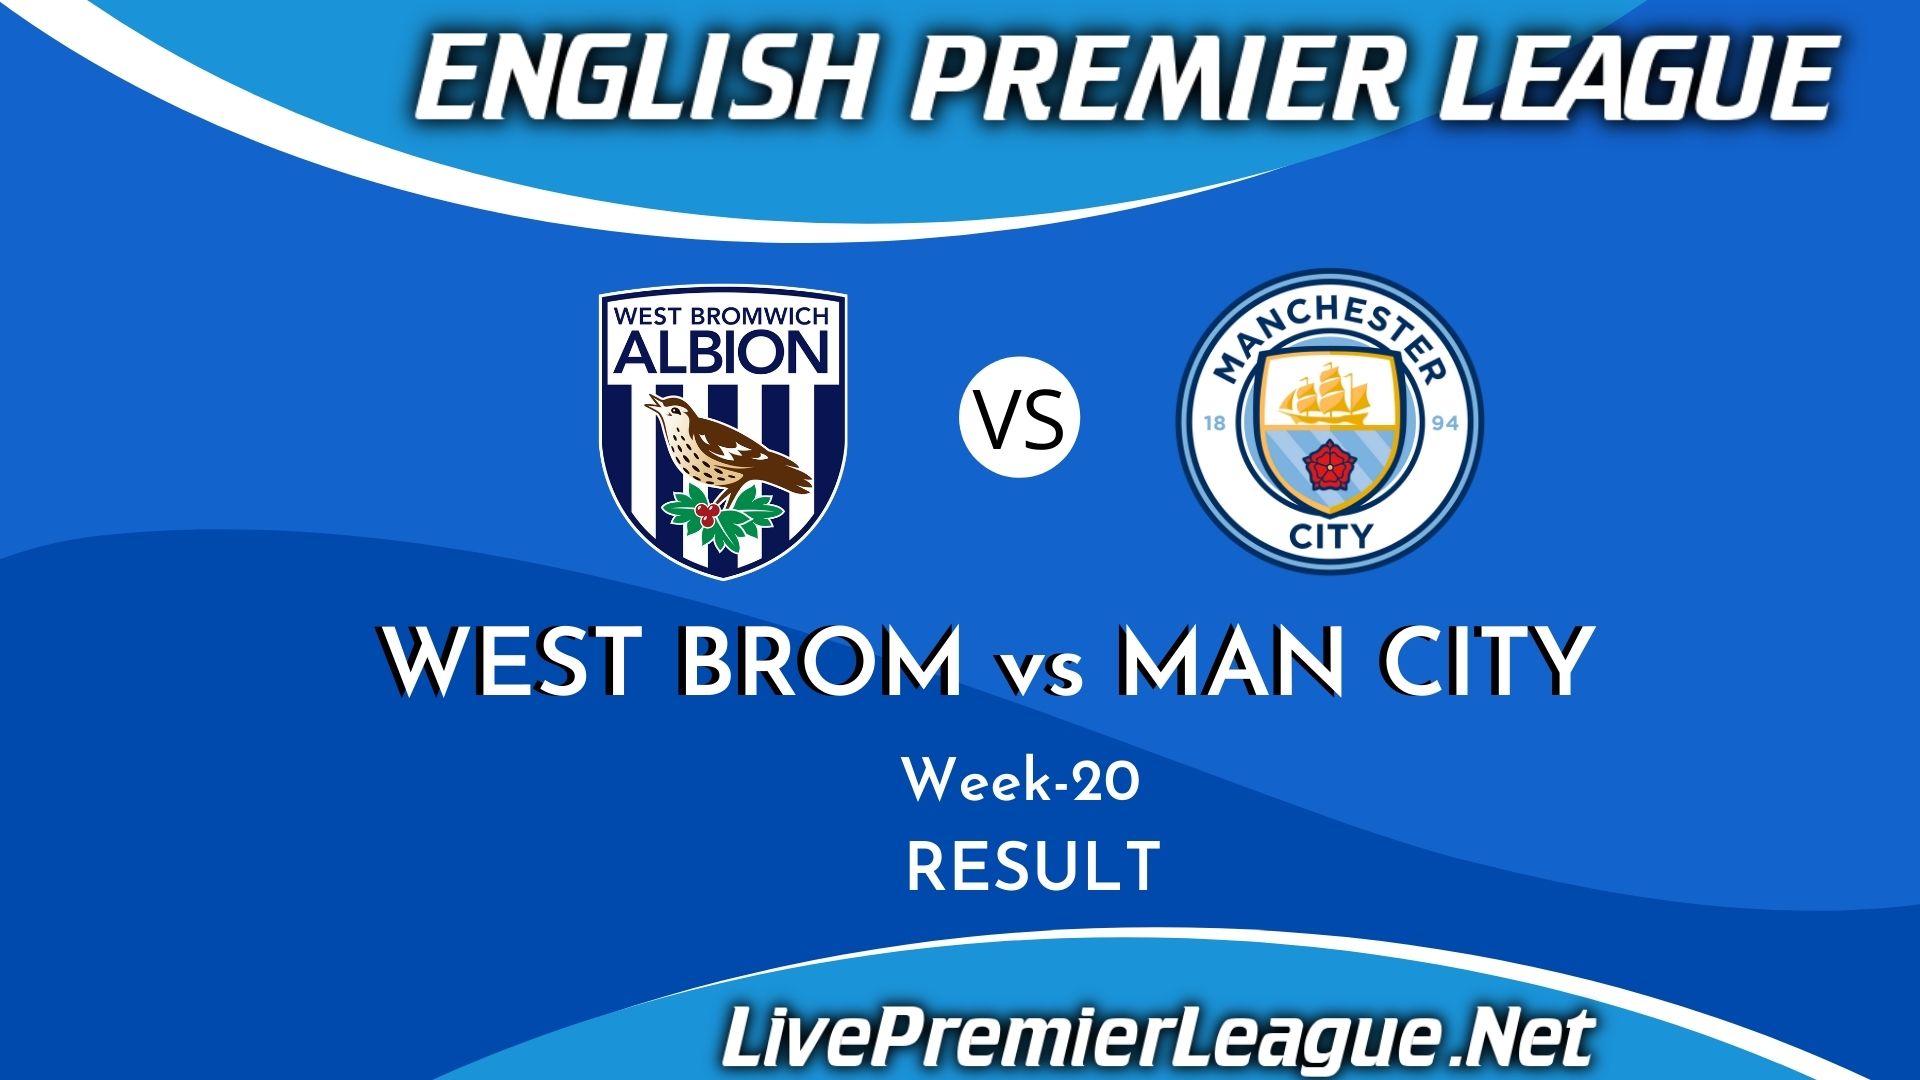 West Bromwich Albion Vs Manchester City | EPL Week 20 Result 2021